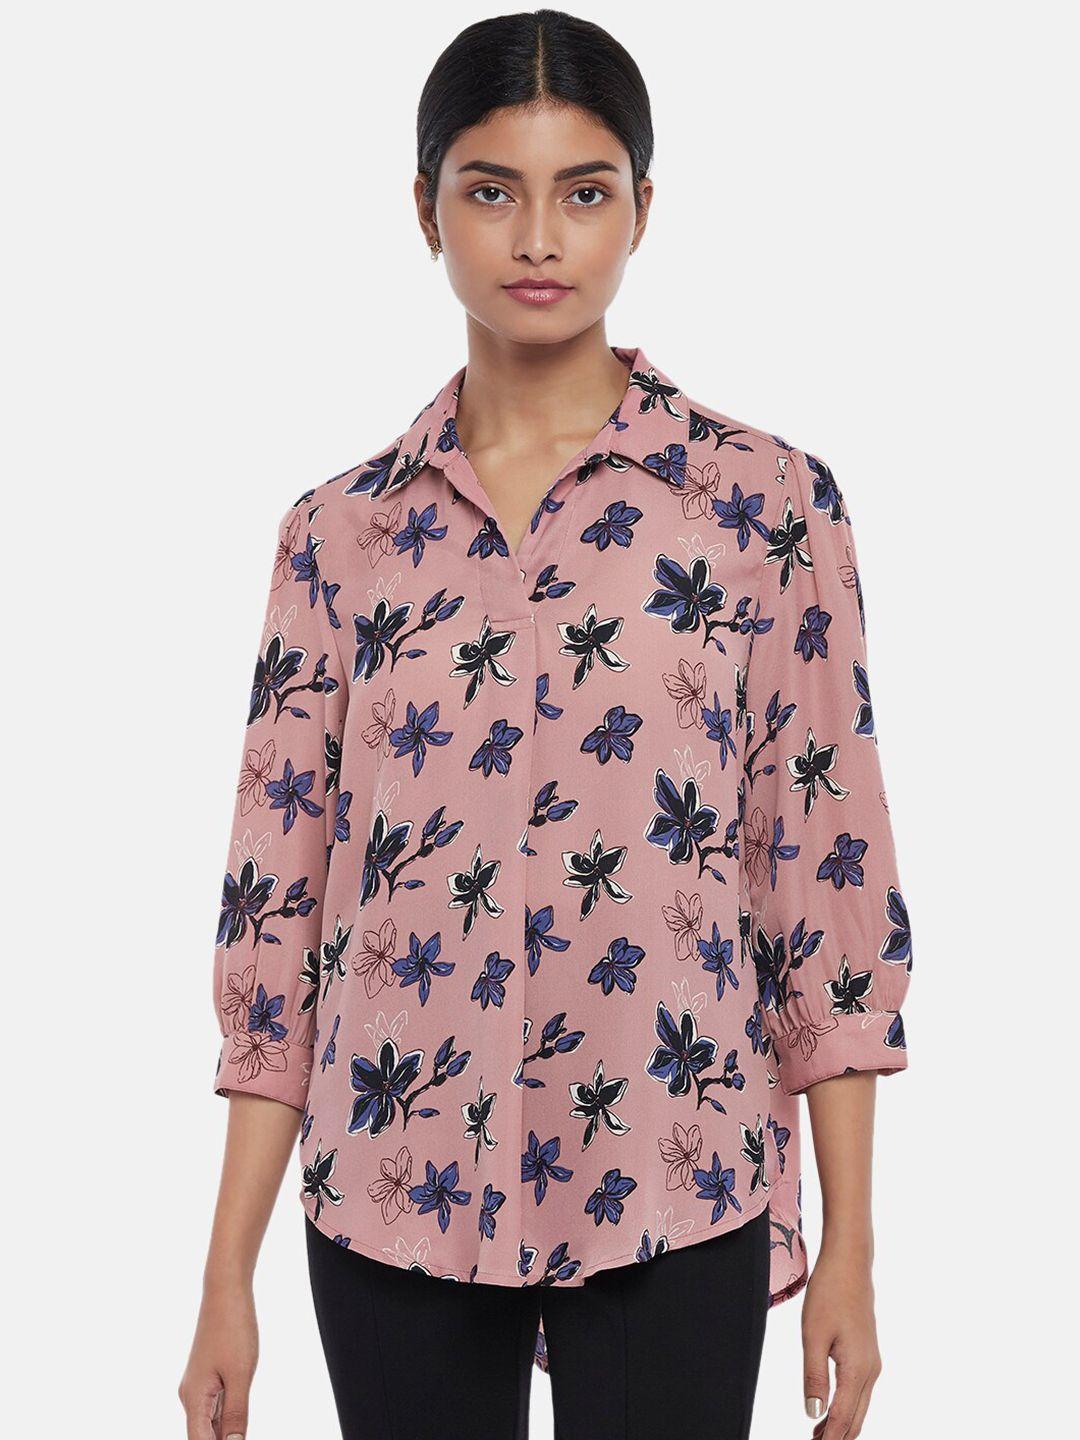 annabelle by pantaloons pink floral print shirt style top